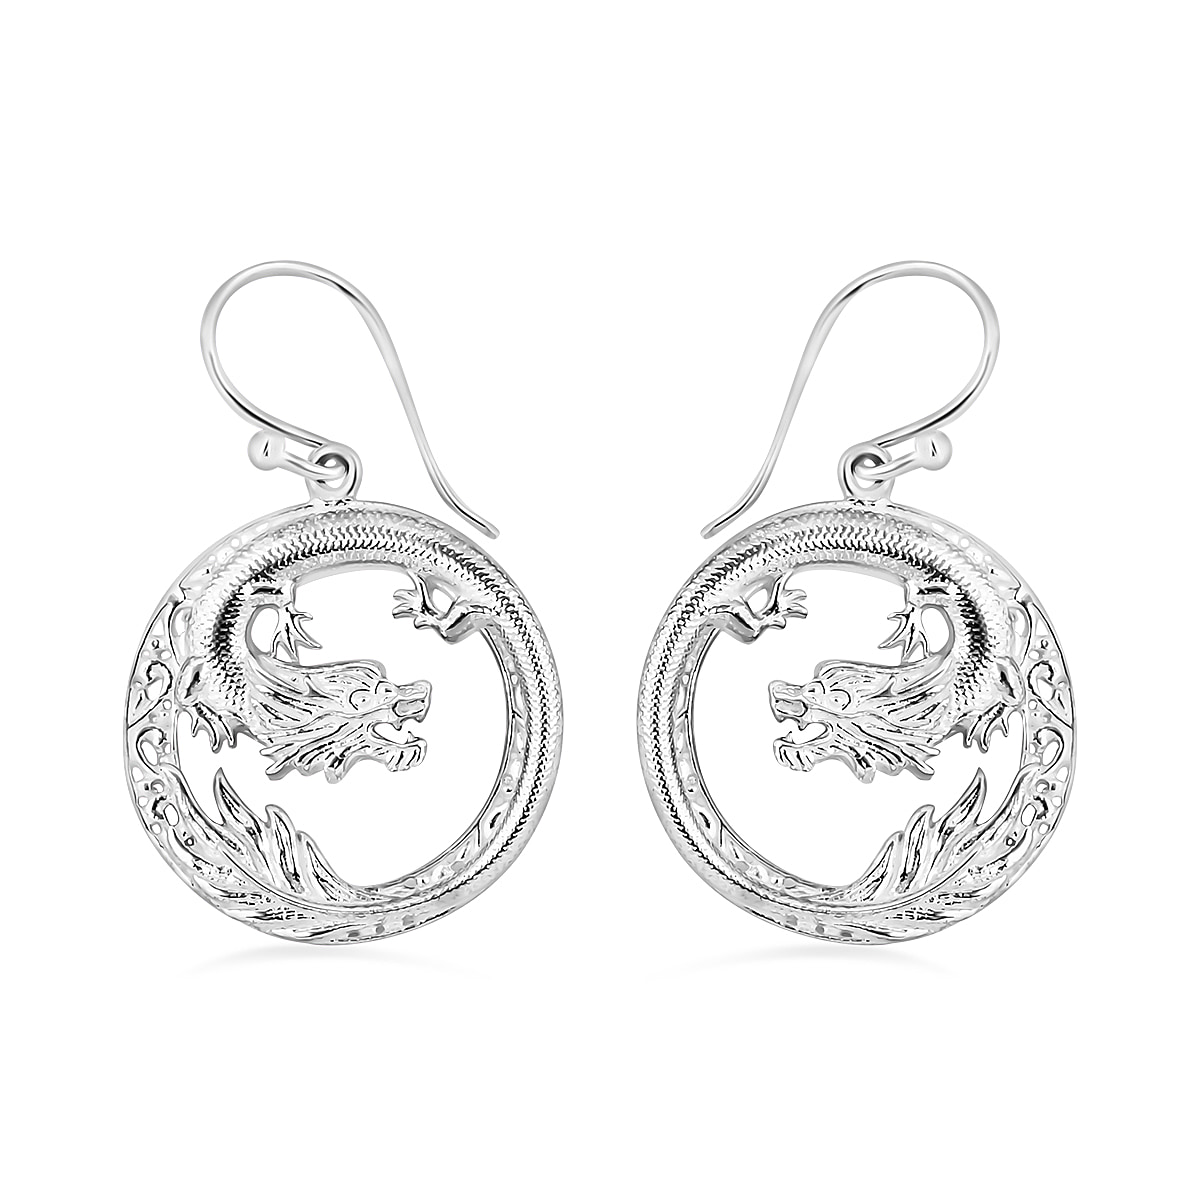 Royal Bali Collection - Sterling Silver Dragon Earrings, Silver Wt. 6.30 Gms